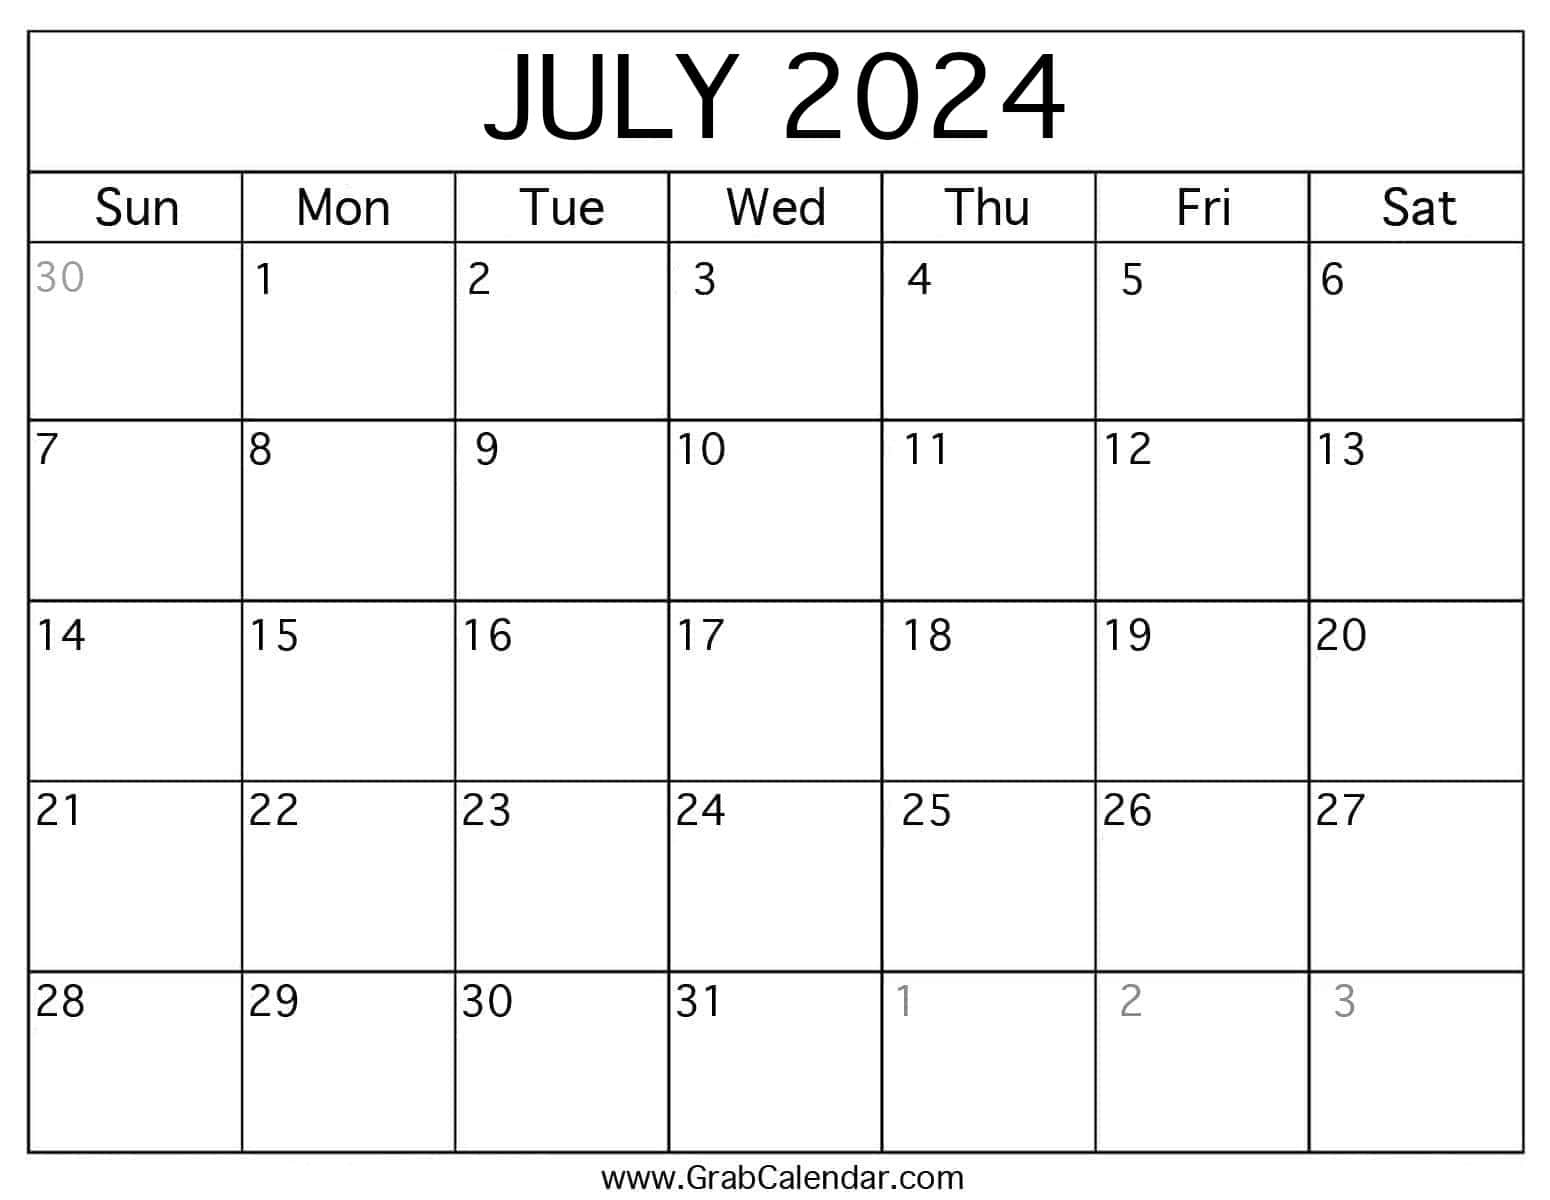 Printable July 2024 Calendar within A Calendar of July 2024